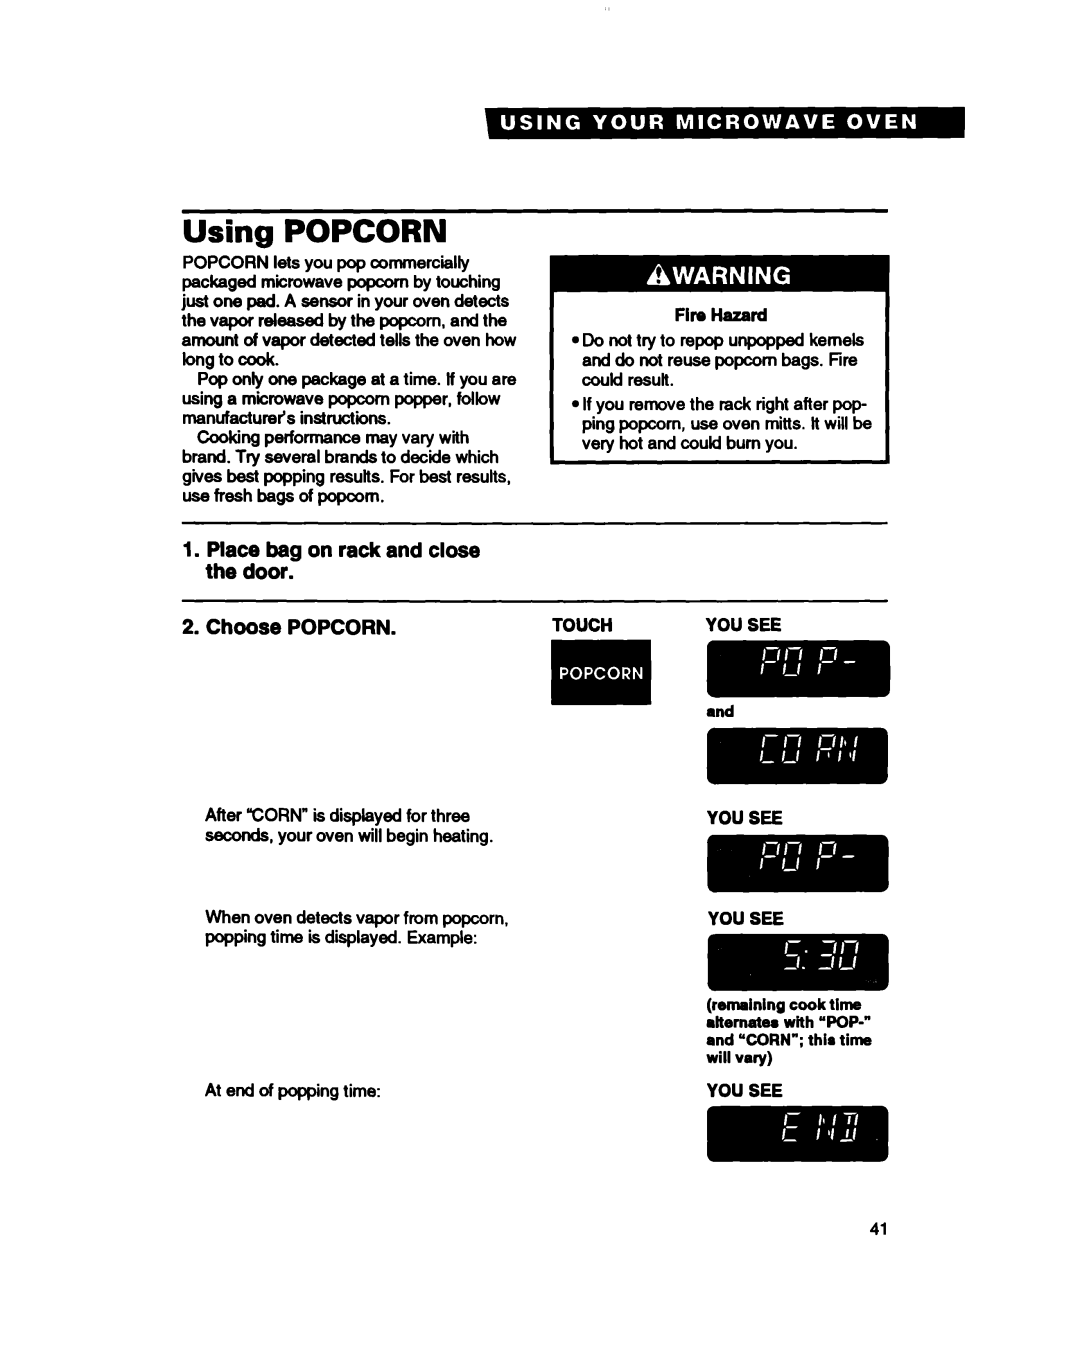 Whirlpool MH7115XB warranty Using POPCORN, Place bag on rack and close the door, Choose POPCORN 